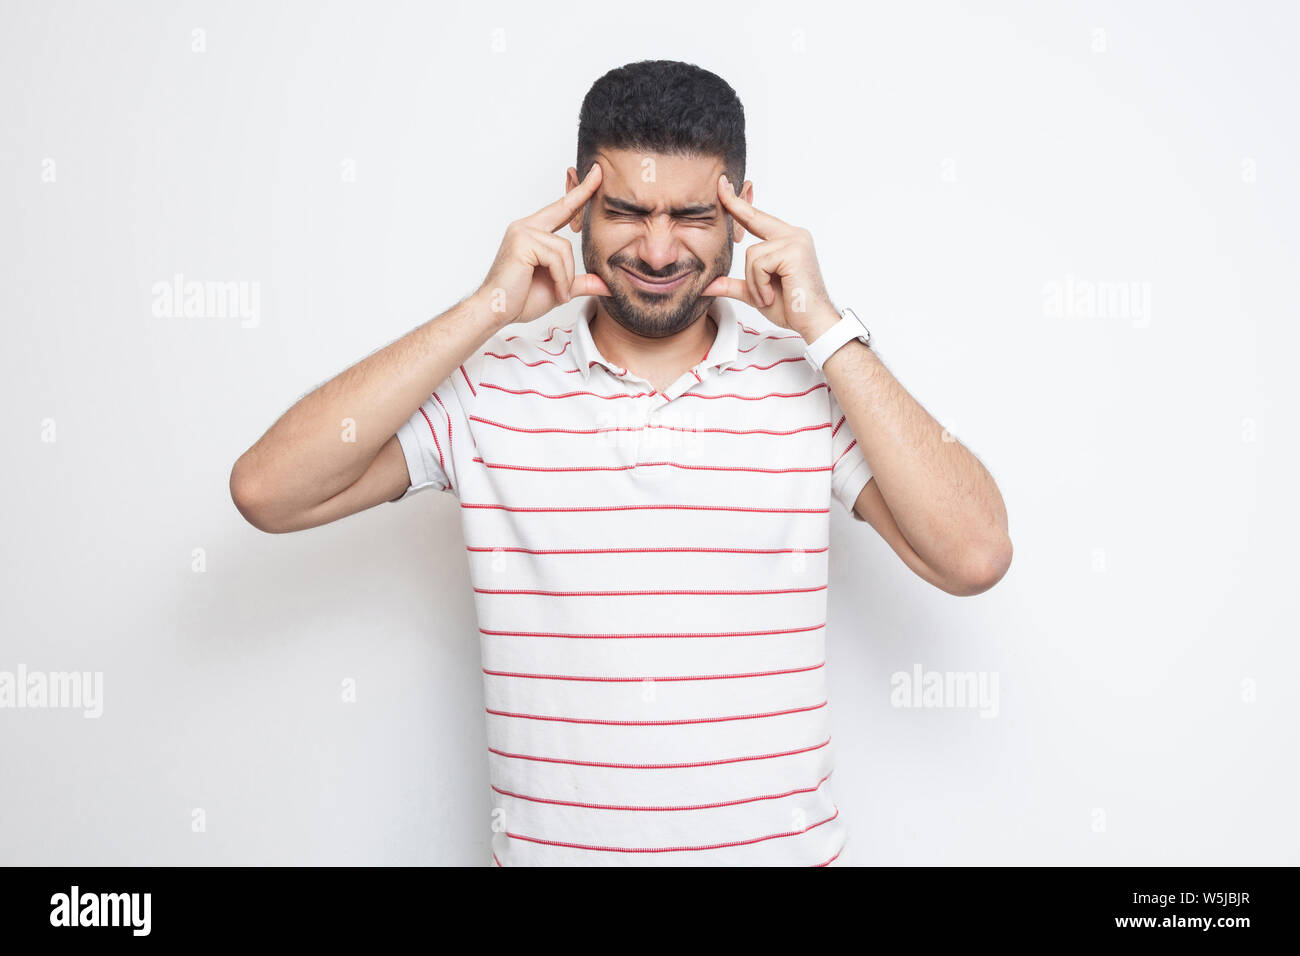 headache or confution. Portrait of confused handsome bearded young man in striped t-shirt standing, holding his painful head or thinking. indoor studi Stock Photo